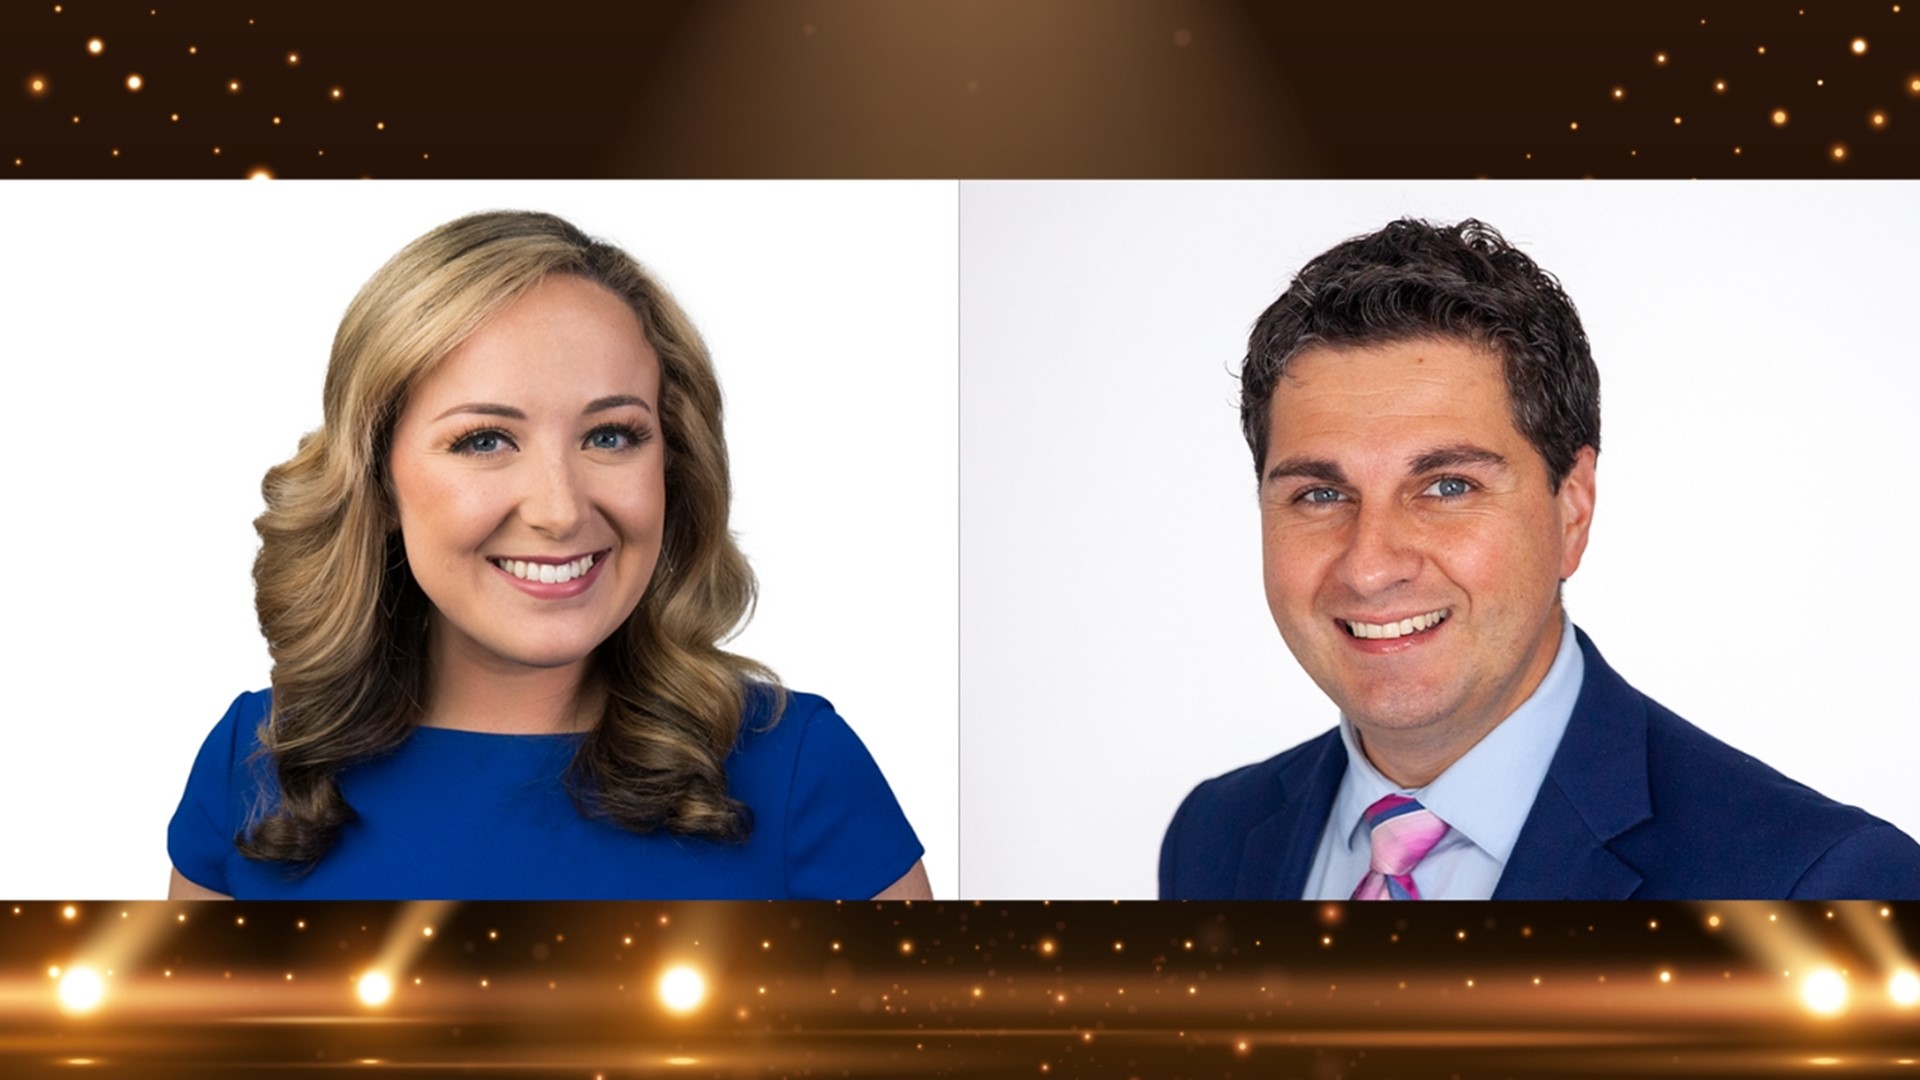 Brittany and Chris won big at the 37th Midsouth Regional Emmy Awards, taking home the award for Weather for WCNC's Weather IQ series. CONGRATS!